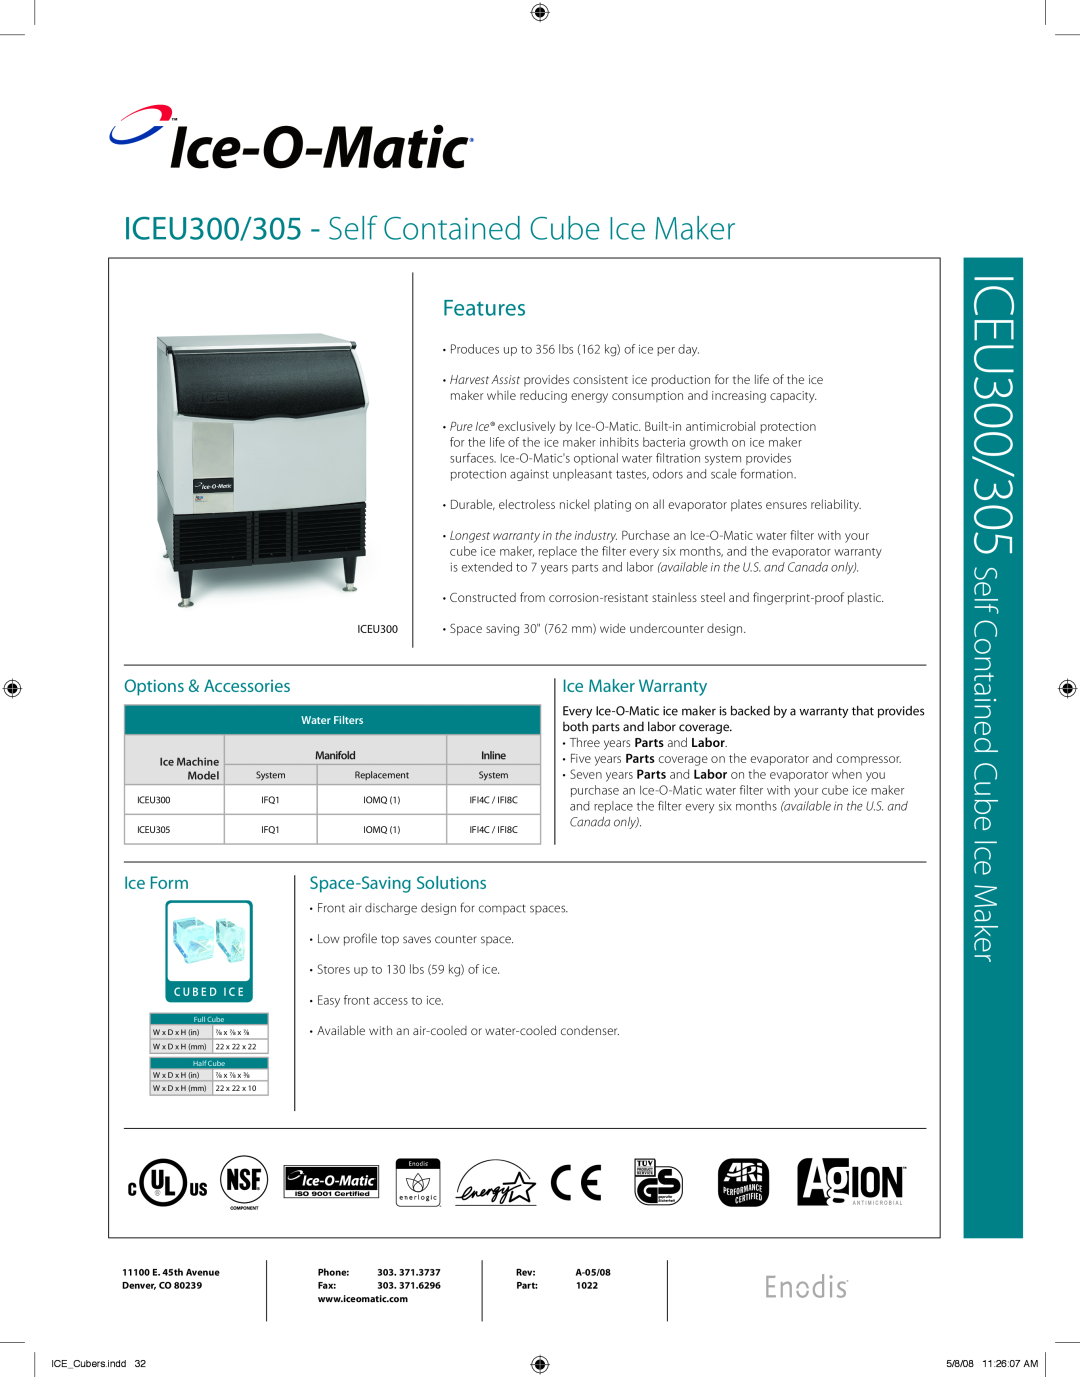 Ice-O-Matic ICEU305 warranty Ice-O-Matic, Options & Accessories, Ice Maker Warranty, Ice Form, Space-Saving Solutions 